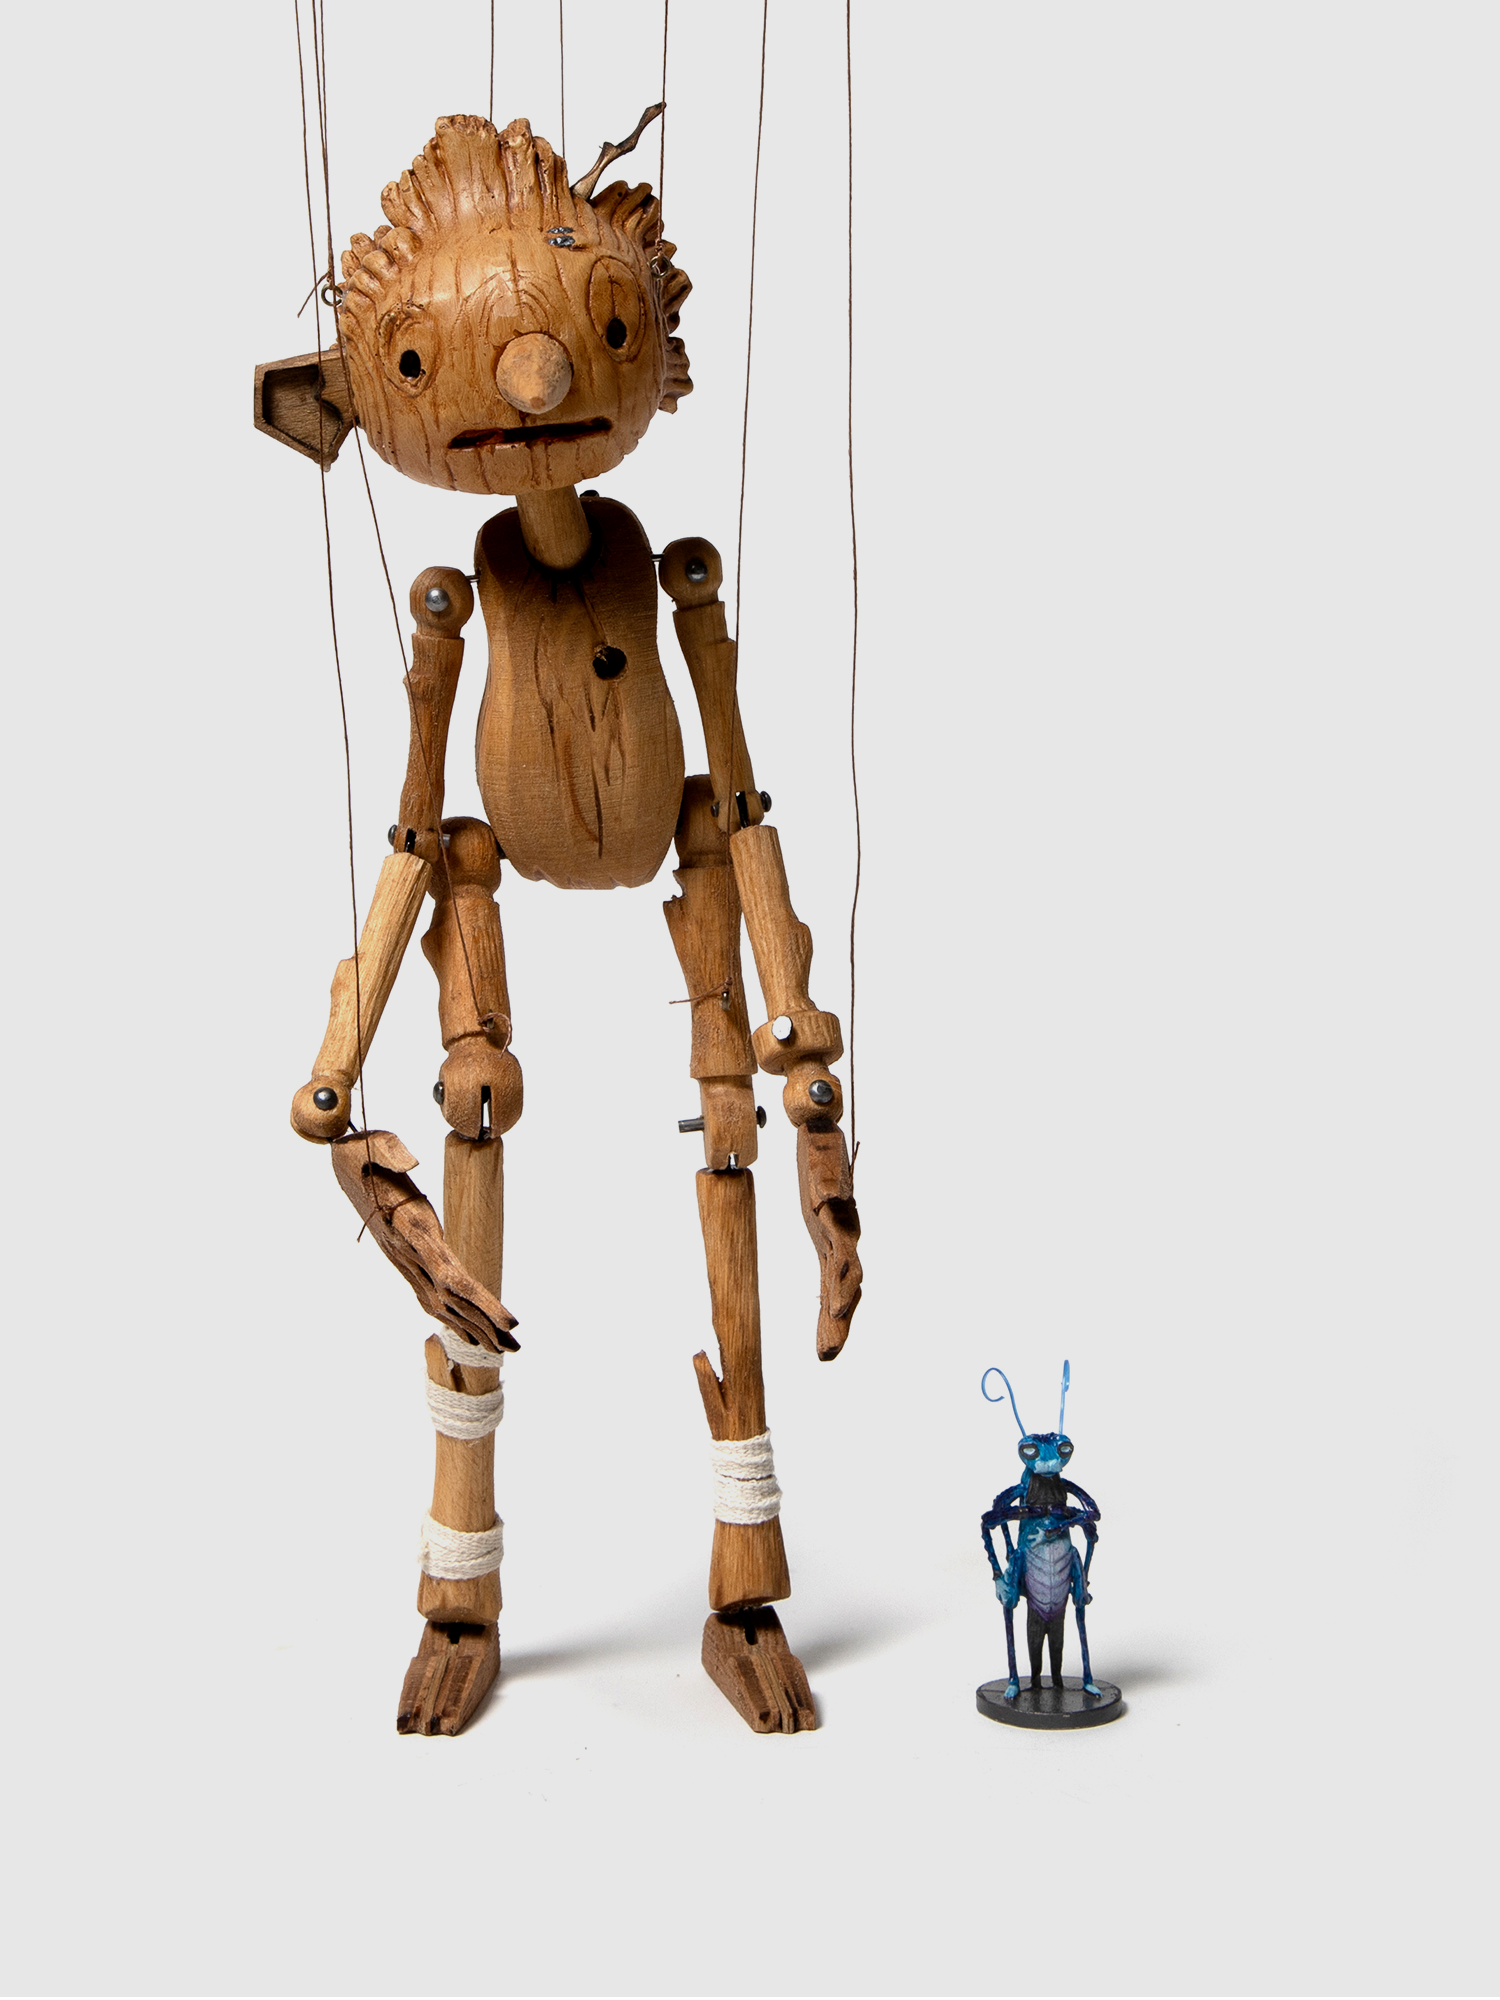 Buy Marionettes Puppets Online, Toys & Games, For Sale South Africa